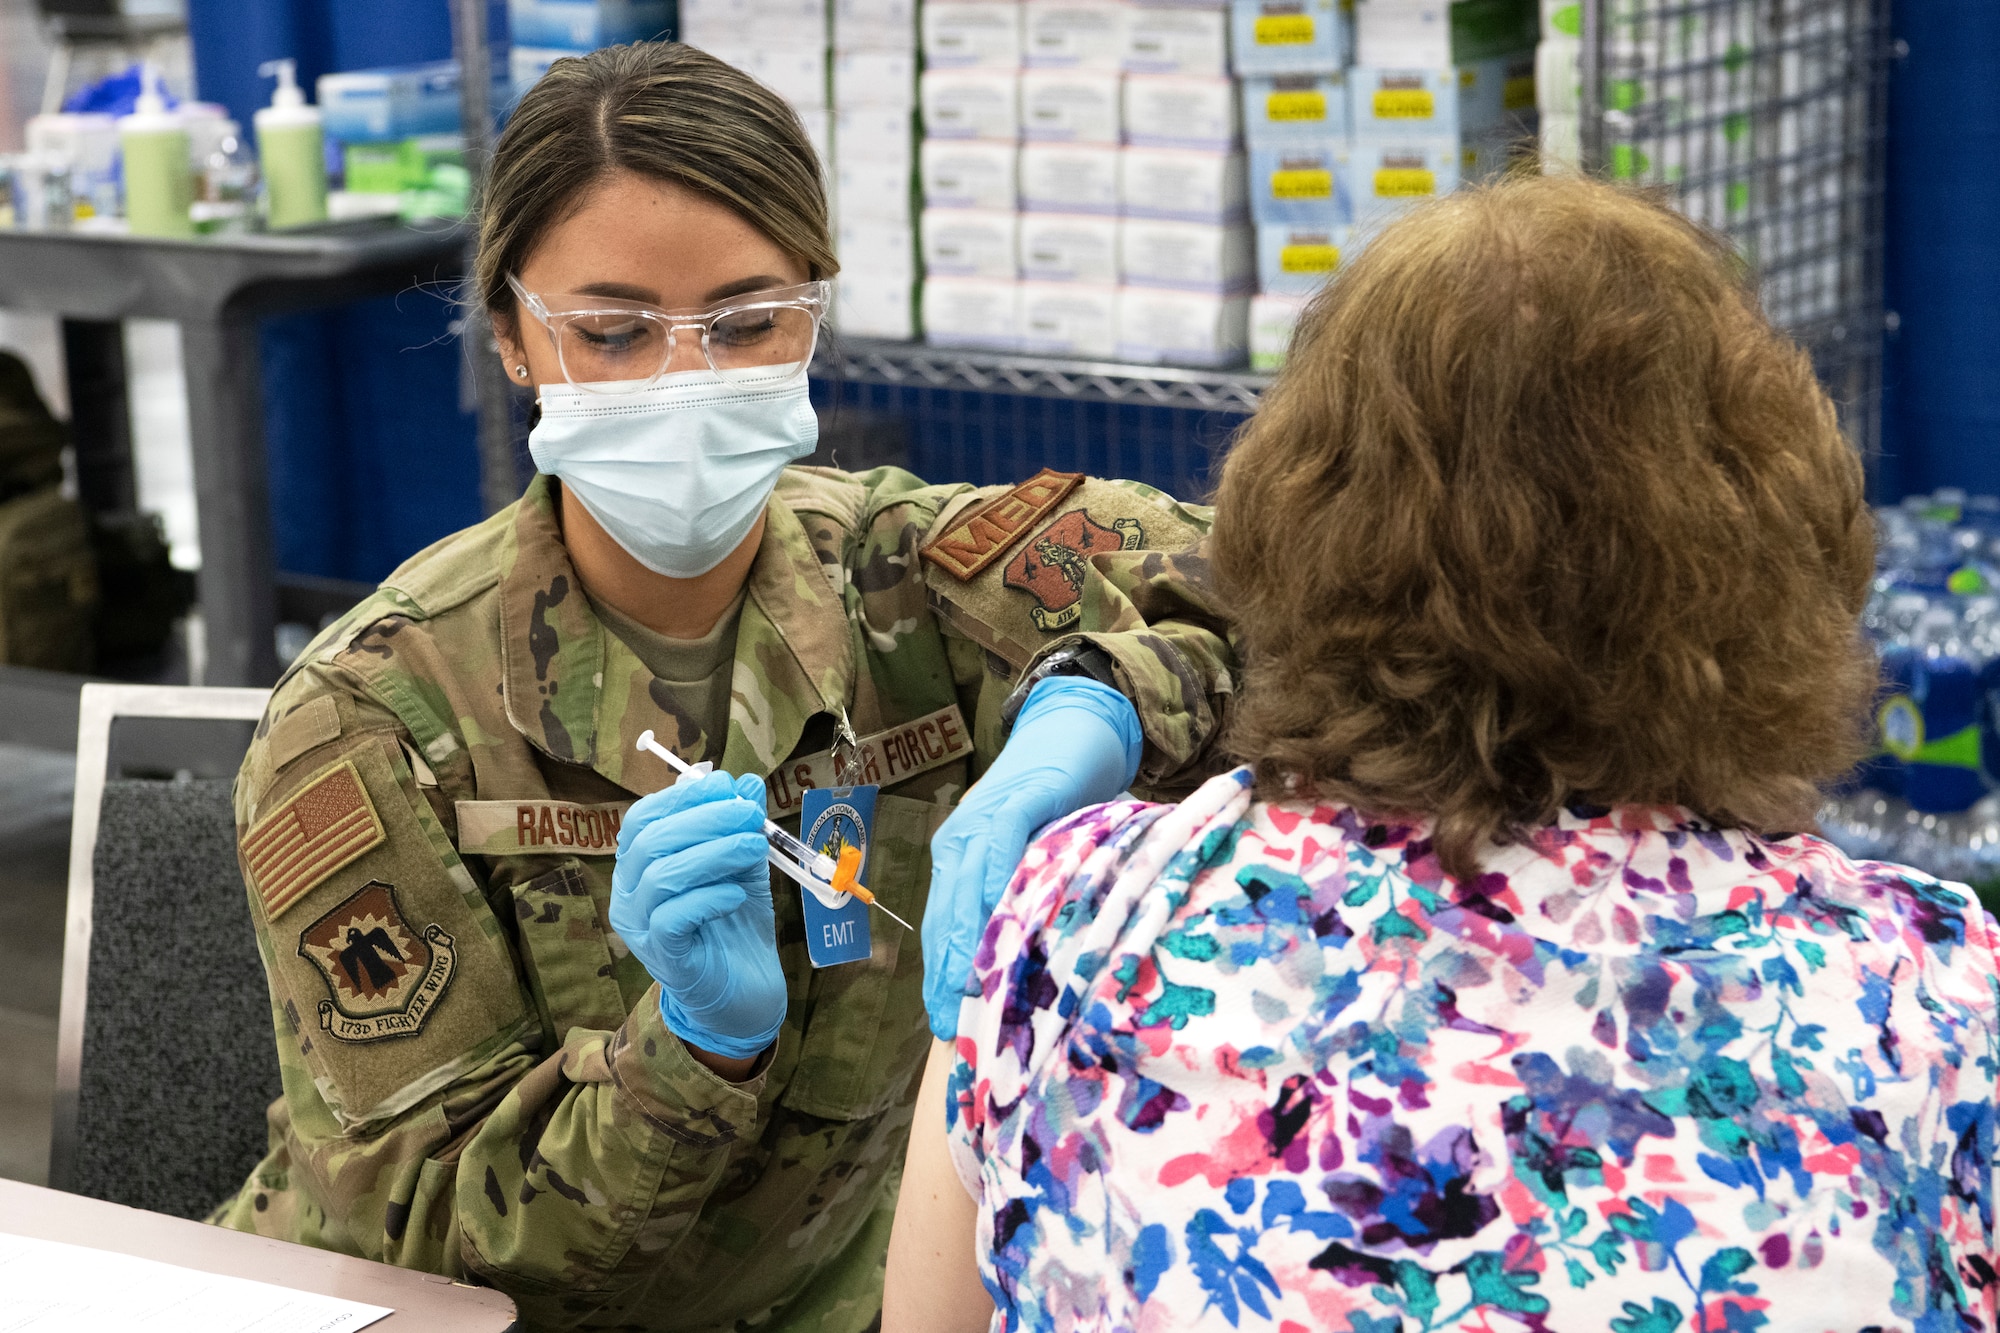 Oregon National Guard Airman 1st Class Yvette Rascon, assigned to the 173rd Fighter Wing, administers the COVID-19 vaccine during a mass vaccination clinic at the Oregon Convention Center, Portland, Ore., April 19, 2021. Oregon Guardsmen have administered almost 300,000 vaccinations.